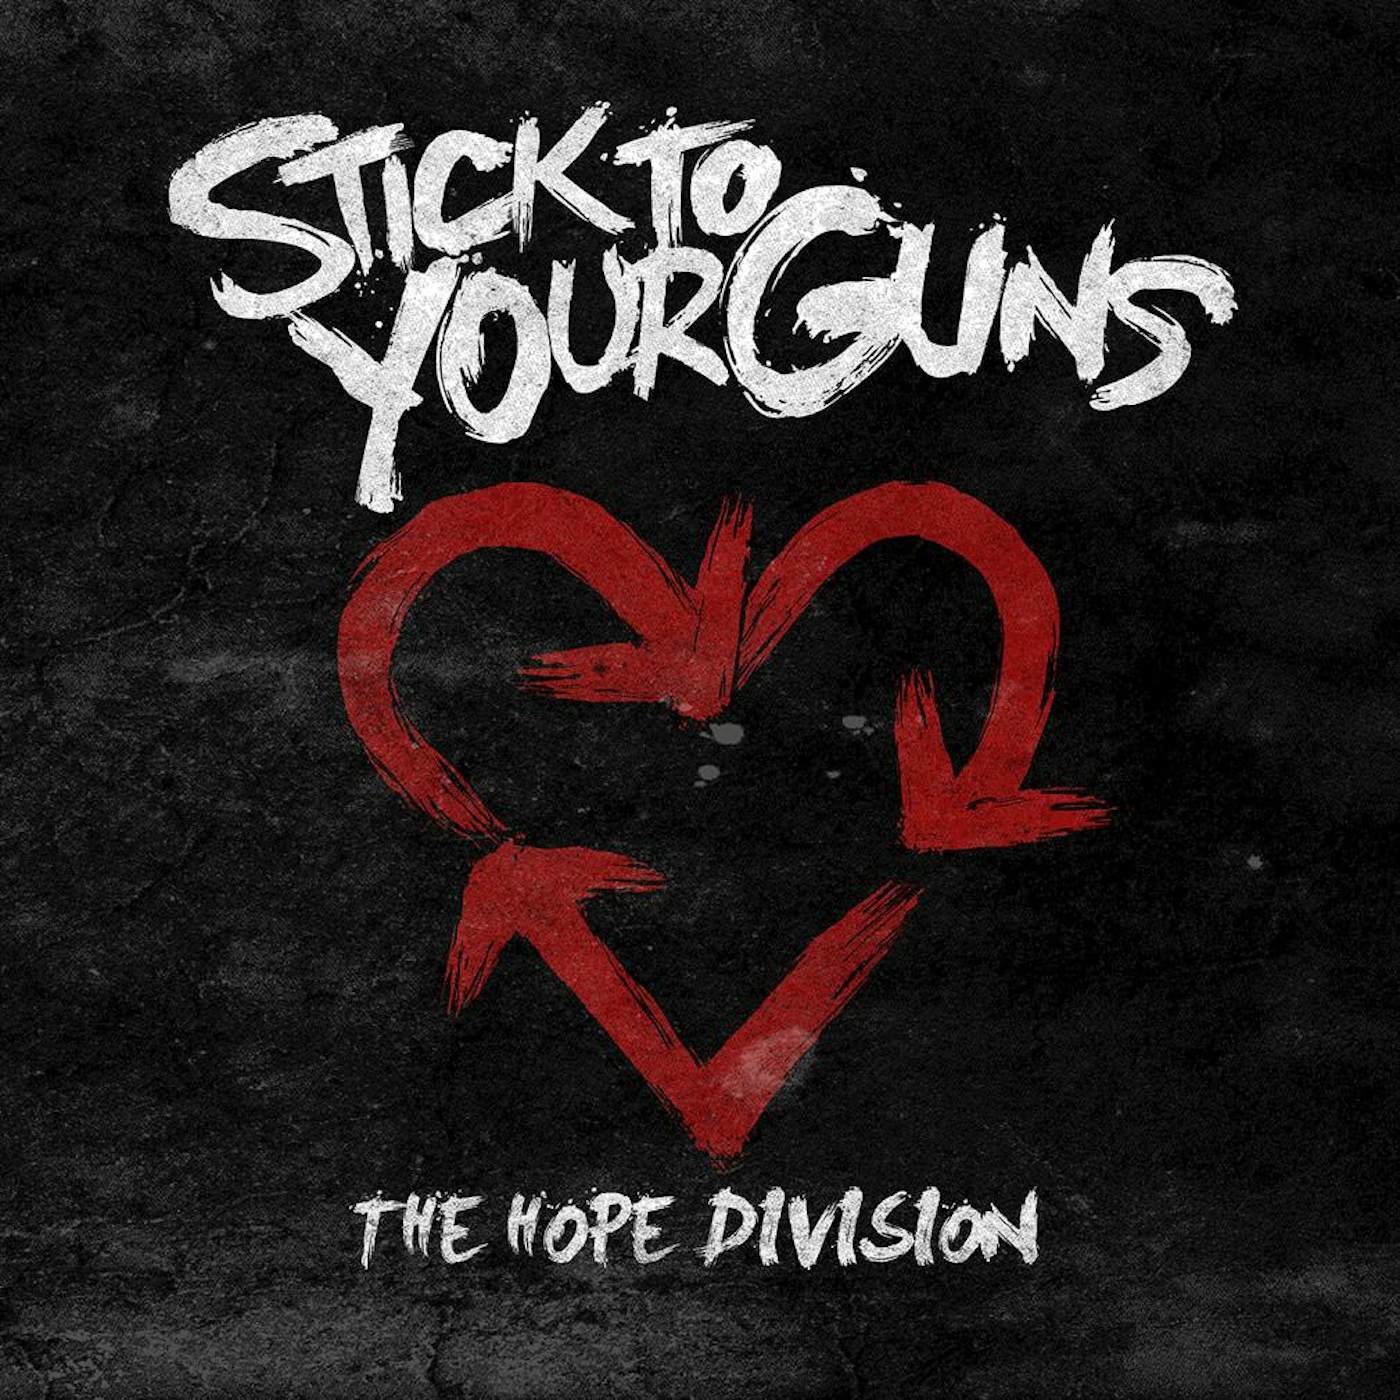 Stick To Your Guns - 'The Hope Division' CD